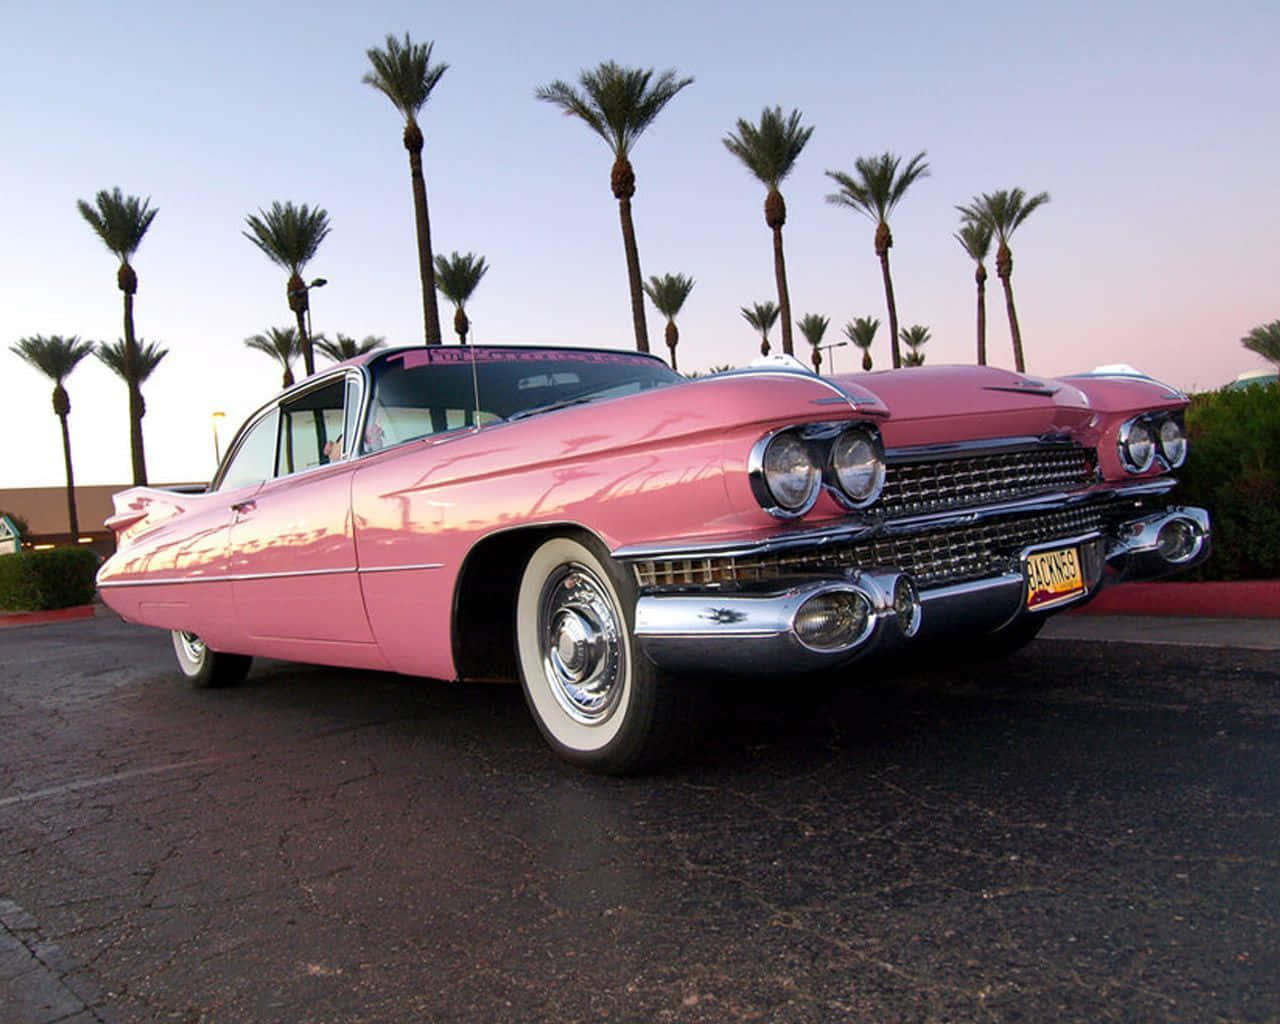 A timelessly elegant pink vintage car stands in the setting sun Wallpaper